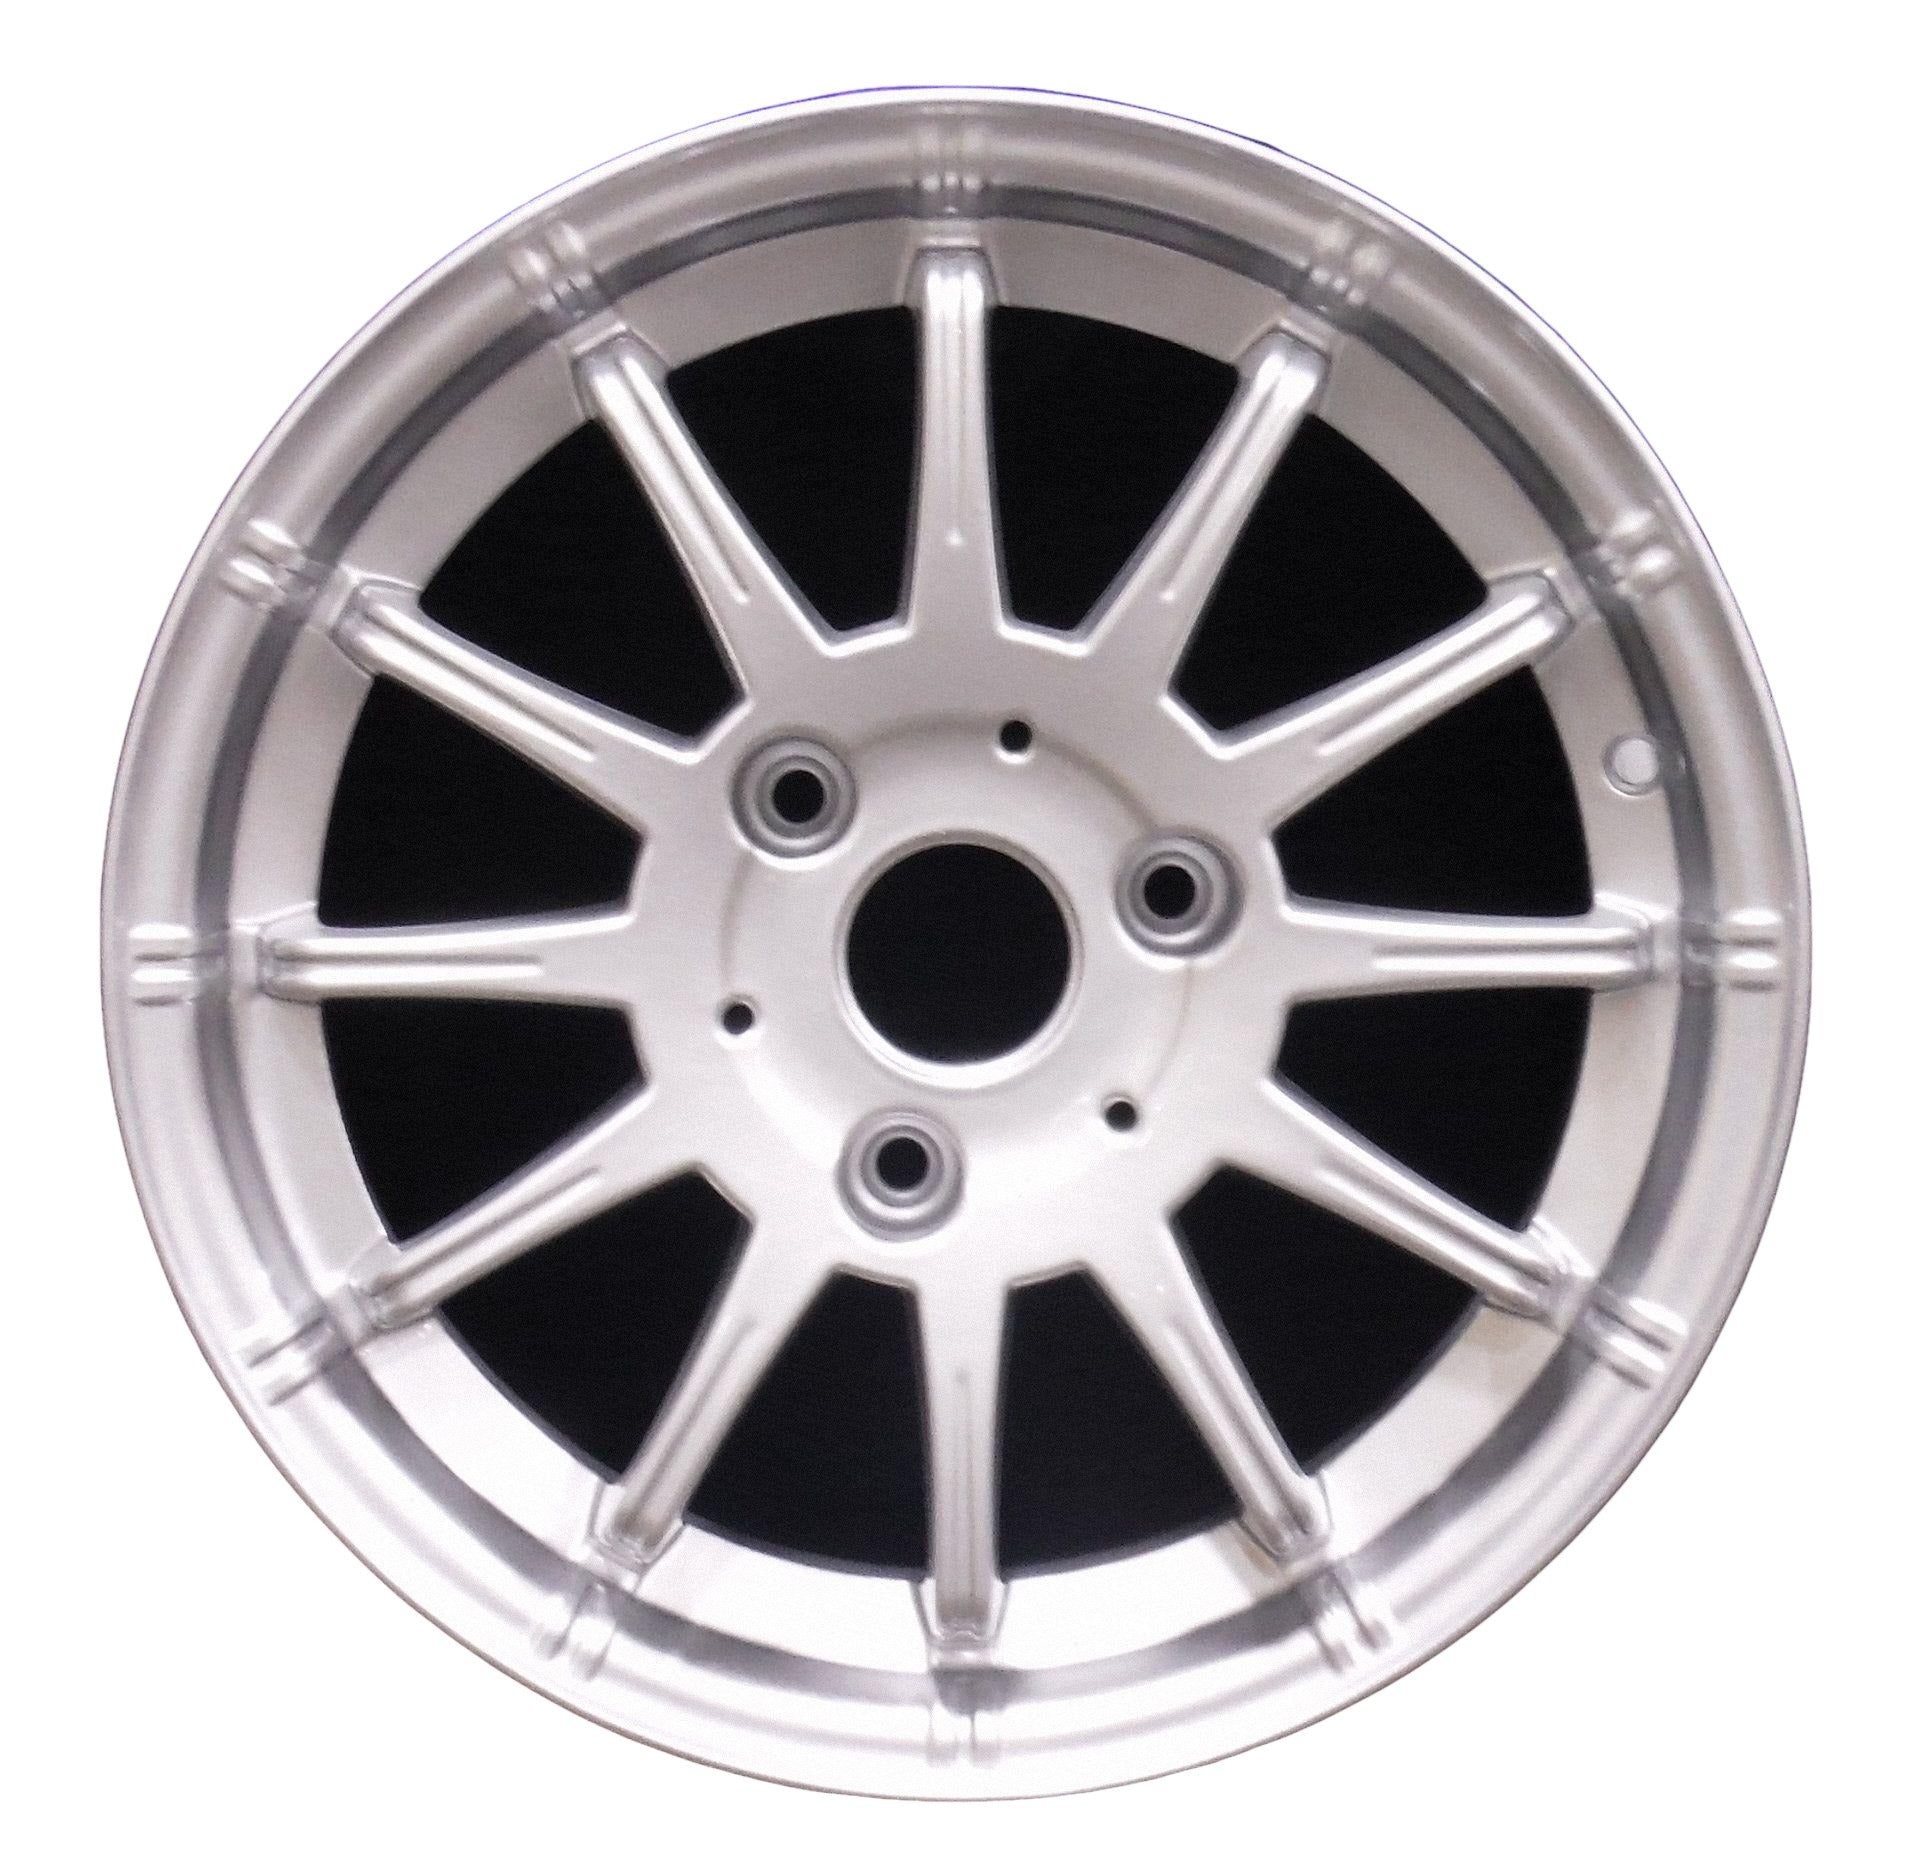 Smart ForTwo  2009, 2010, 2011, 2012, 2013, 2014 Factory OEM Car Wheel Size 15x4.5 Alloy WAO.85190FT.LS09.FF